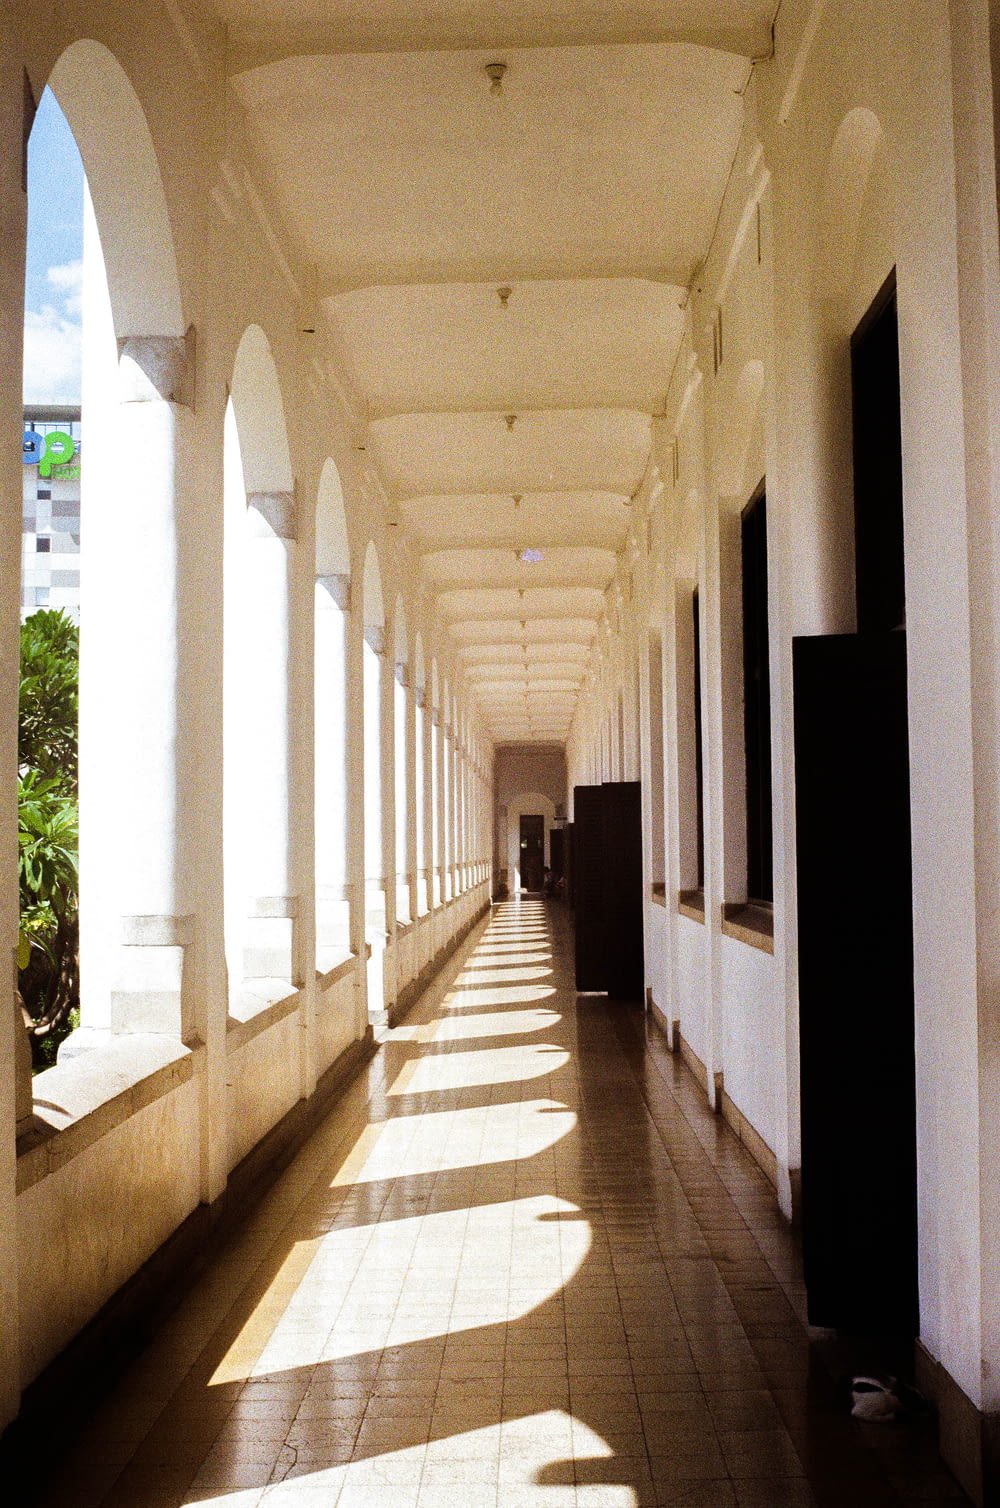 a long hallway lined with columns and windows